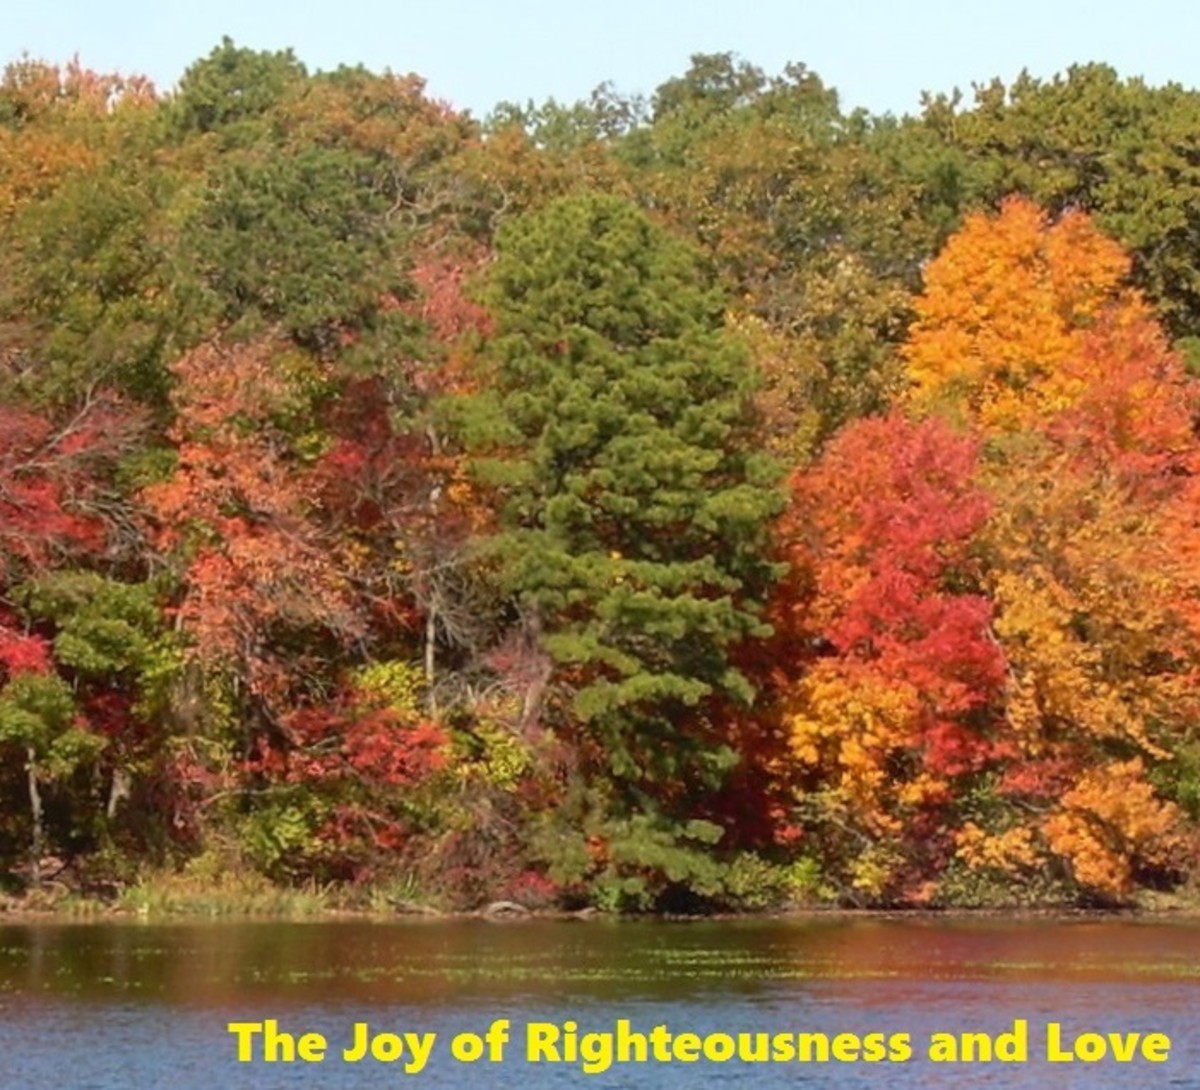 The Joy of Righteousness and Love